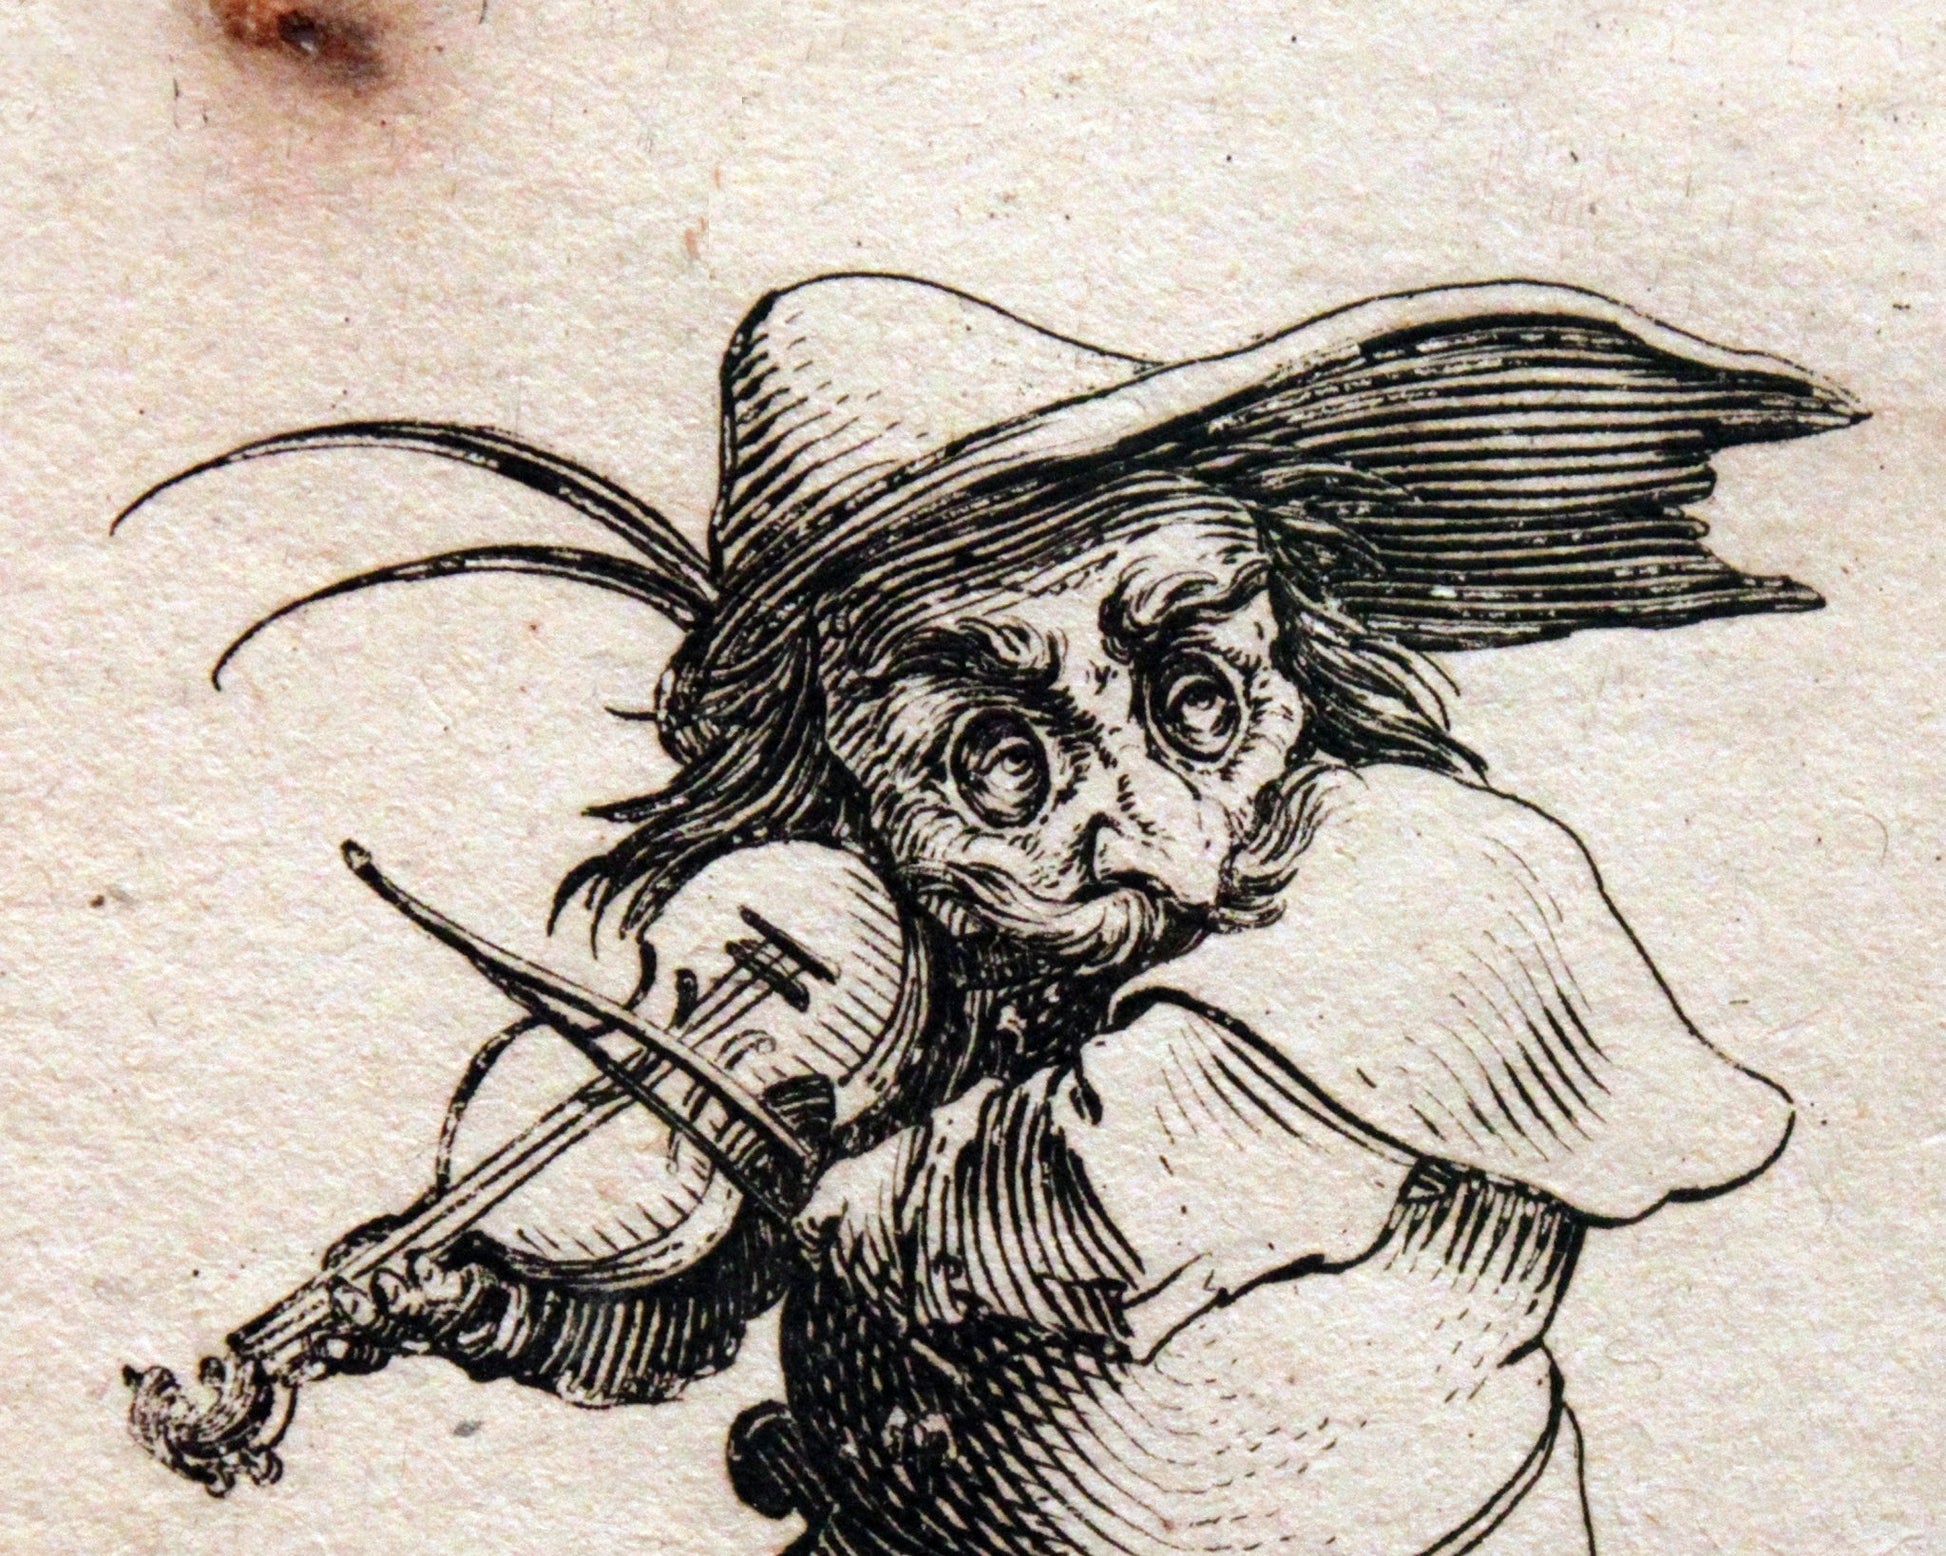 Jacques Callot "Dwarf with Violin" (c.1620) - Mabon Gallery